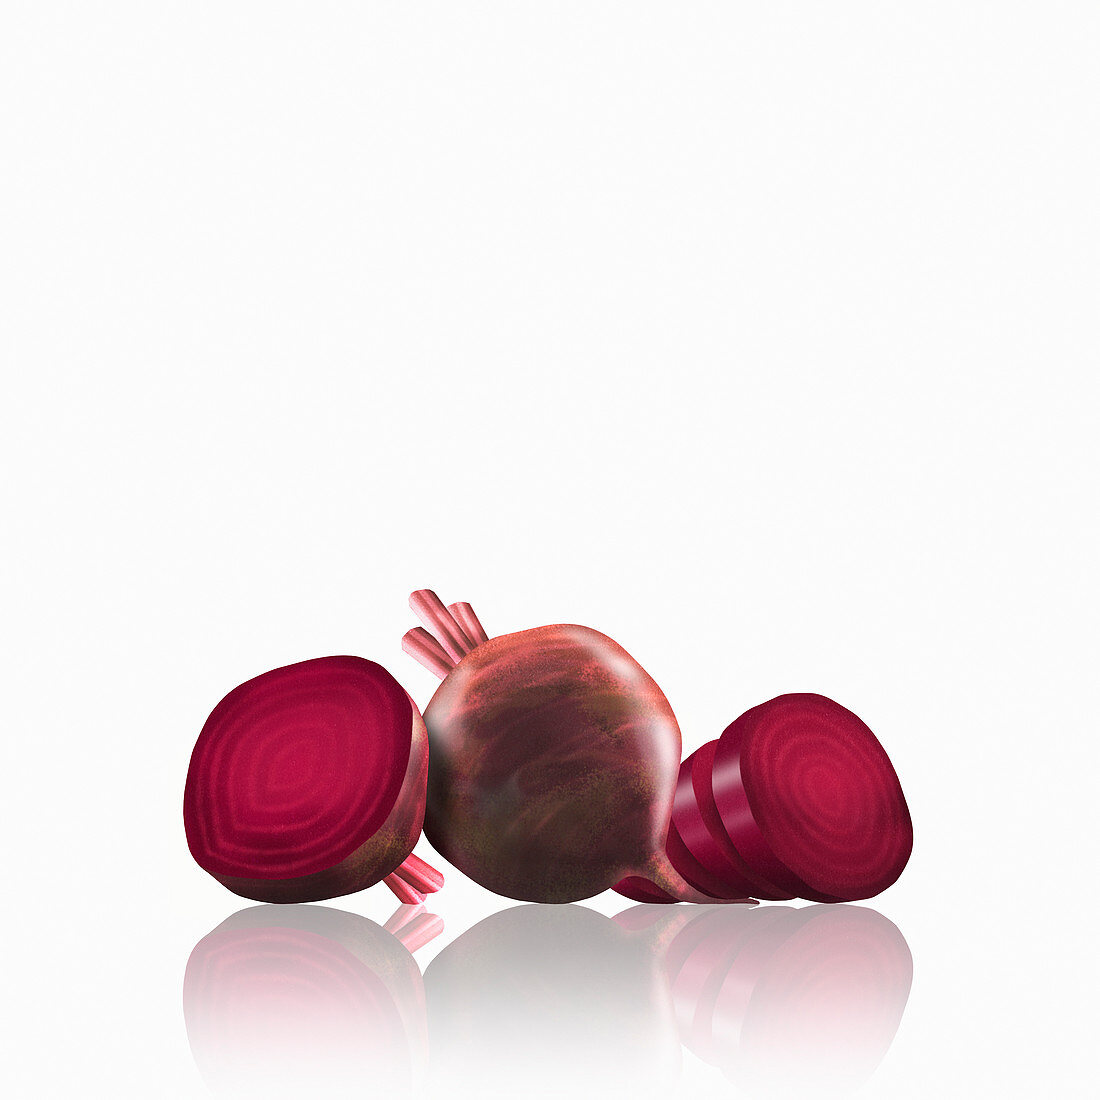 Whole and cut beetroot, illustration